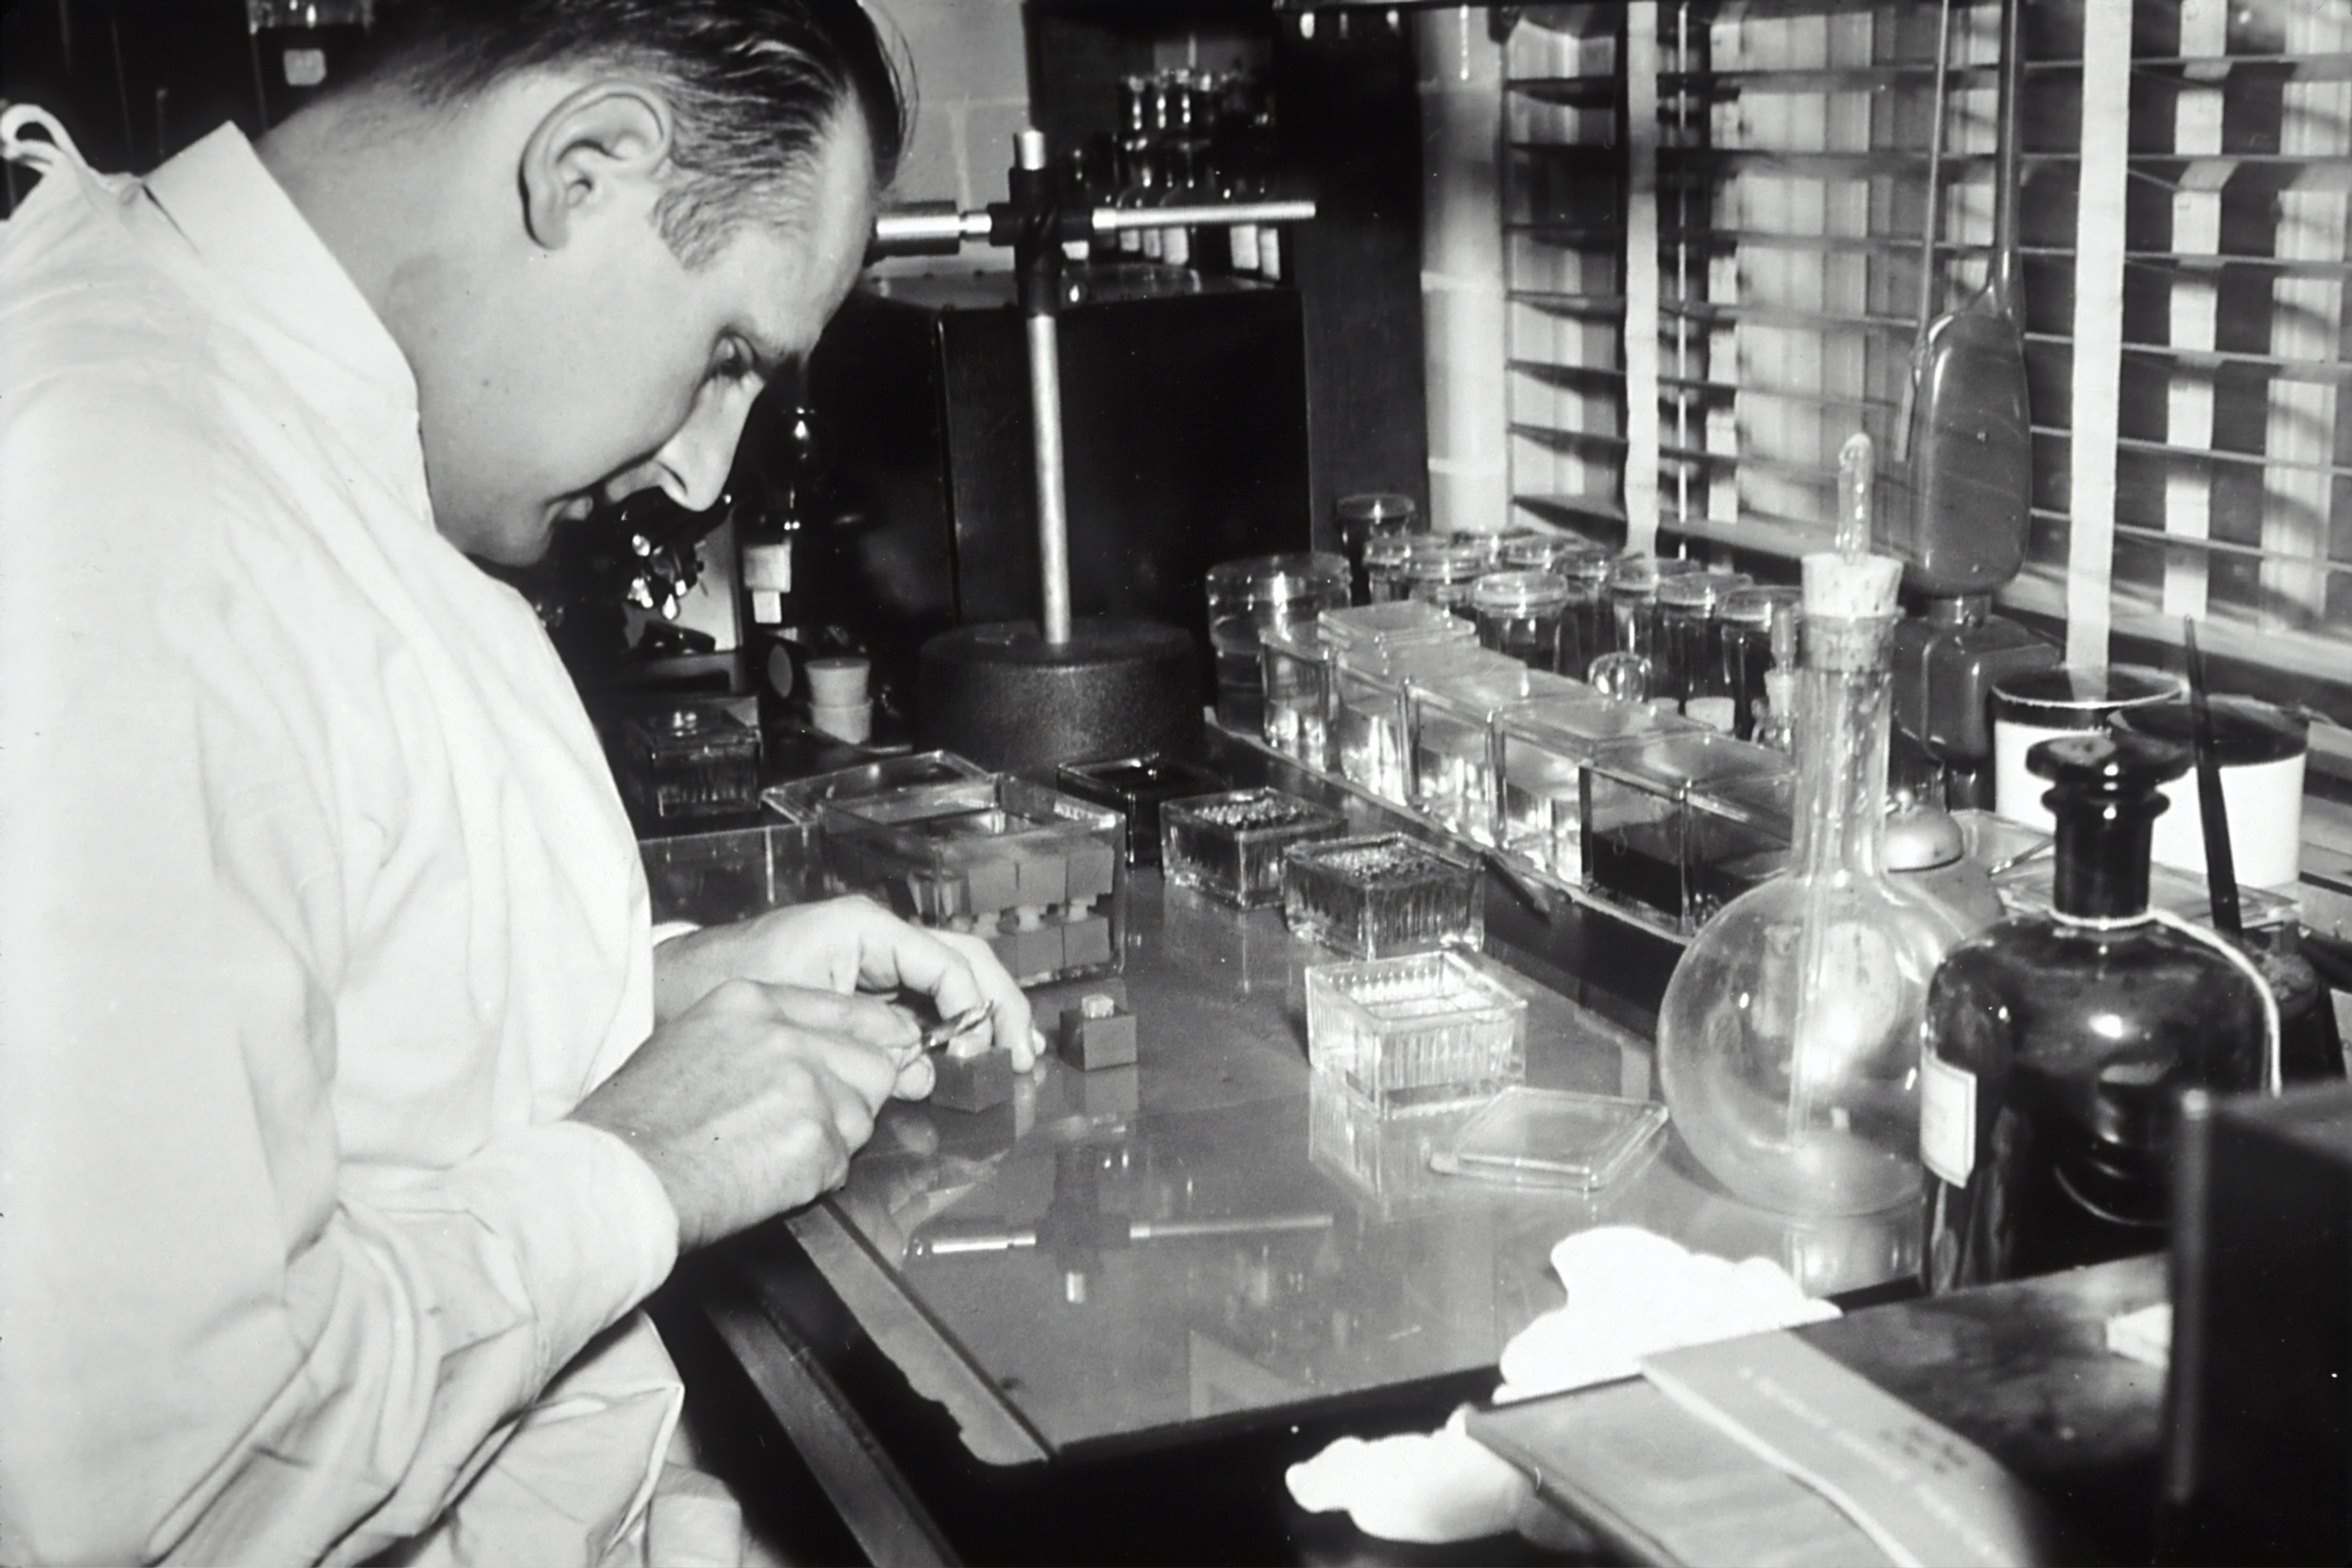 100 years ago, a type 1 diabetes diagnosis was terminal – learn how far we’ve come